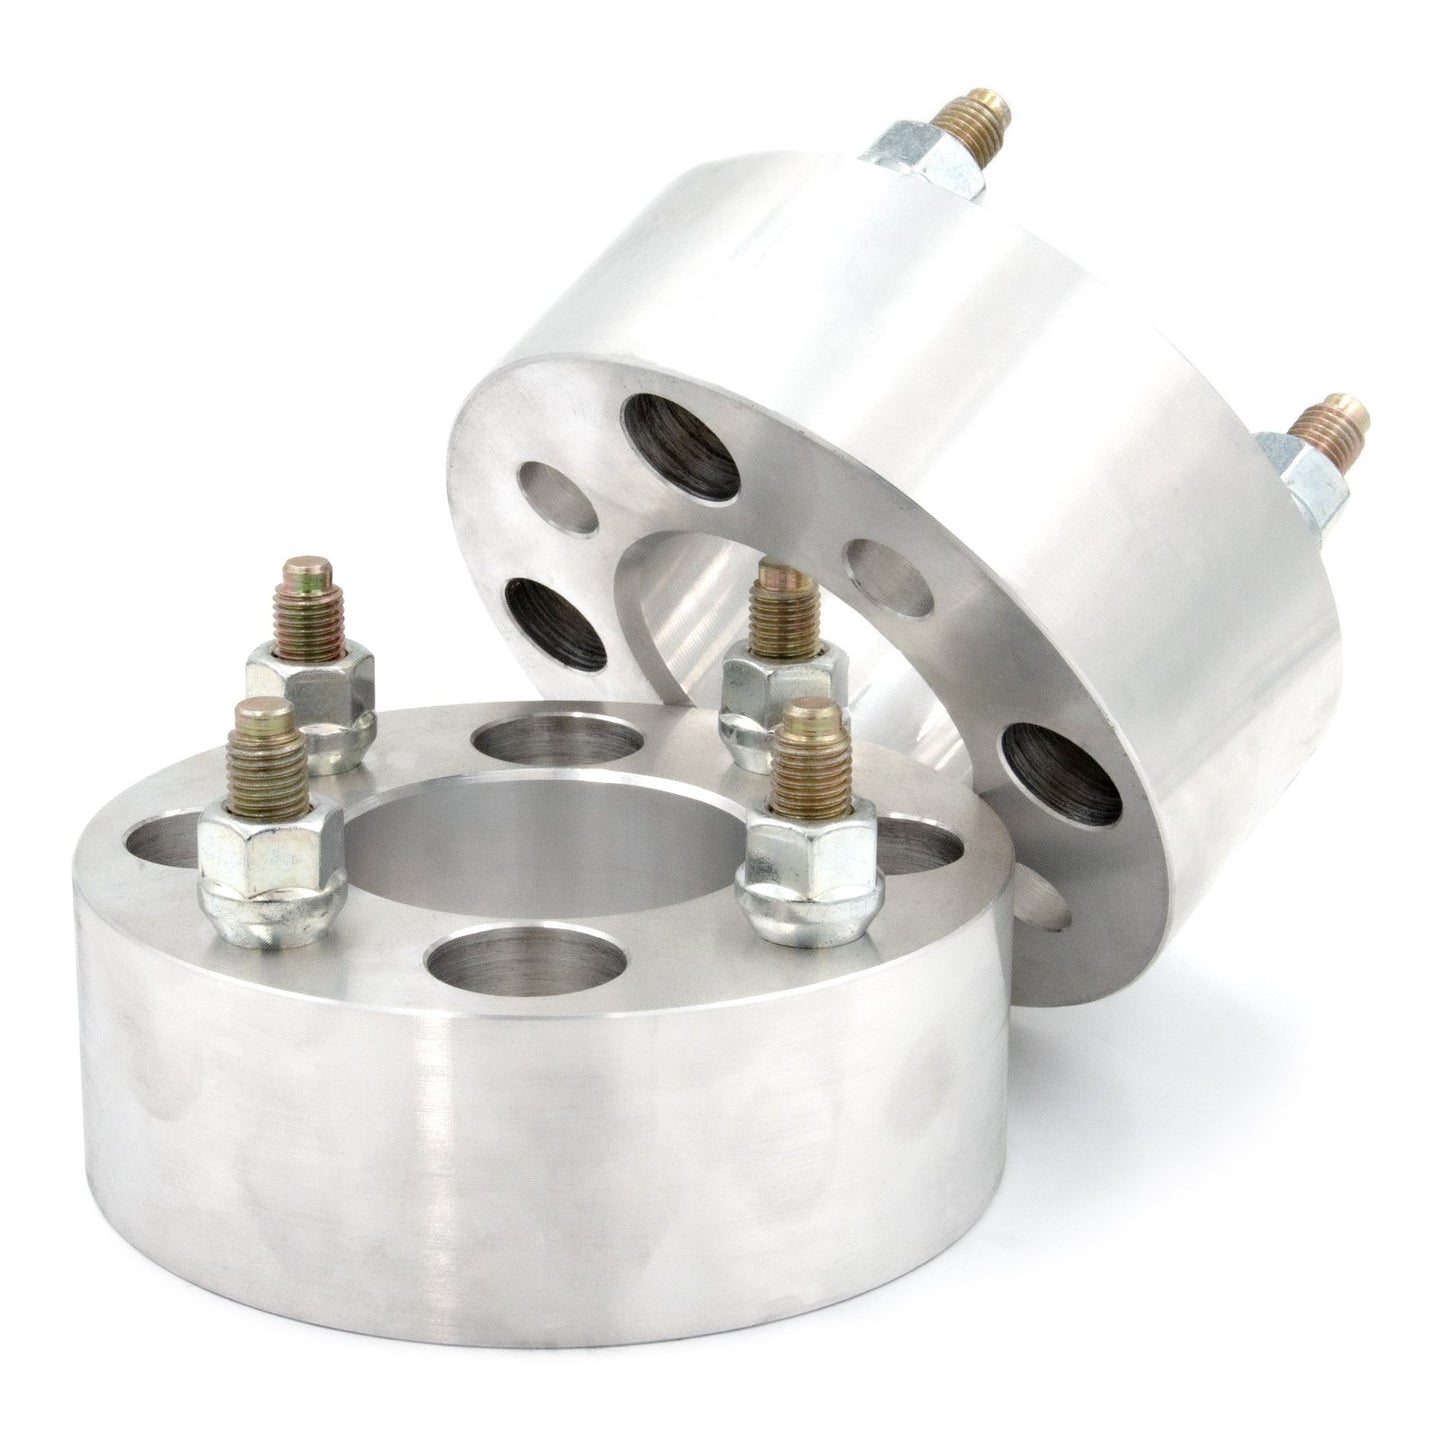 4x100 to 4x115 Wheel Spacer/Adapter - Thickness: 3/4"- 4"